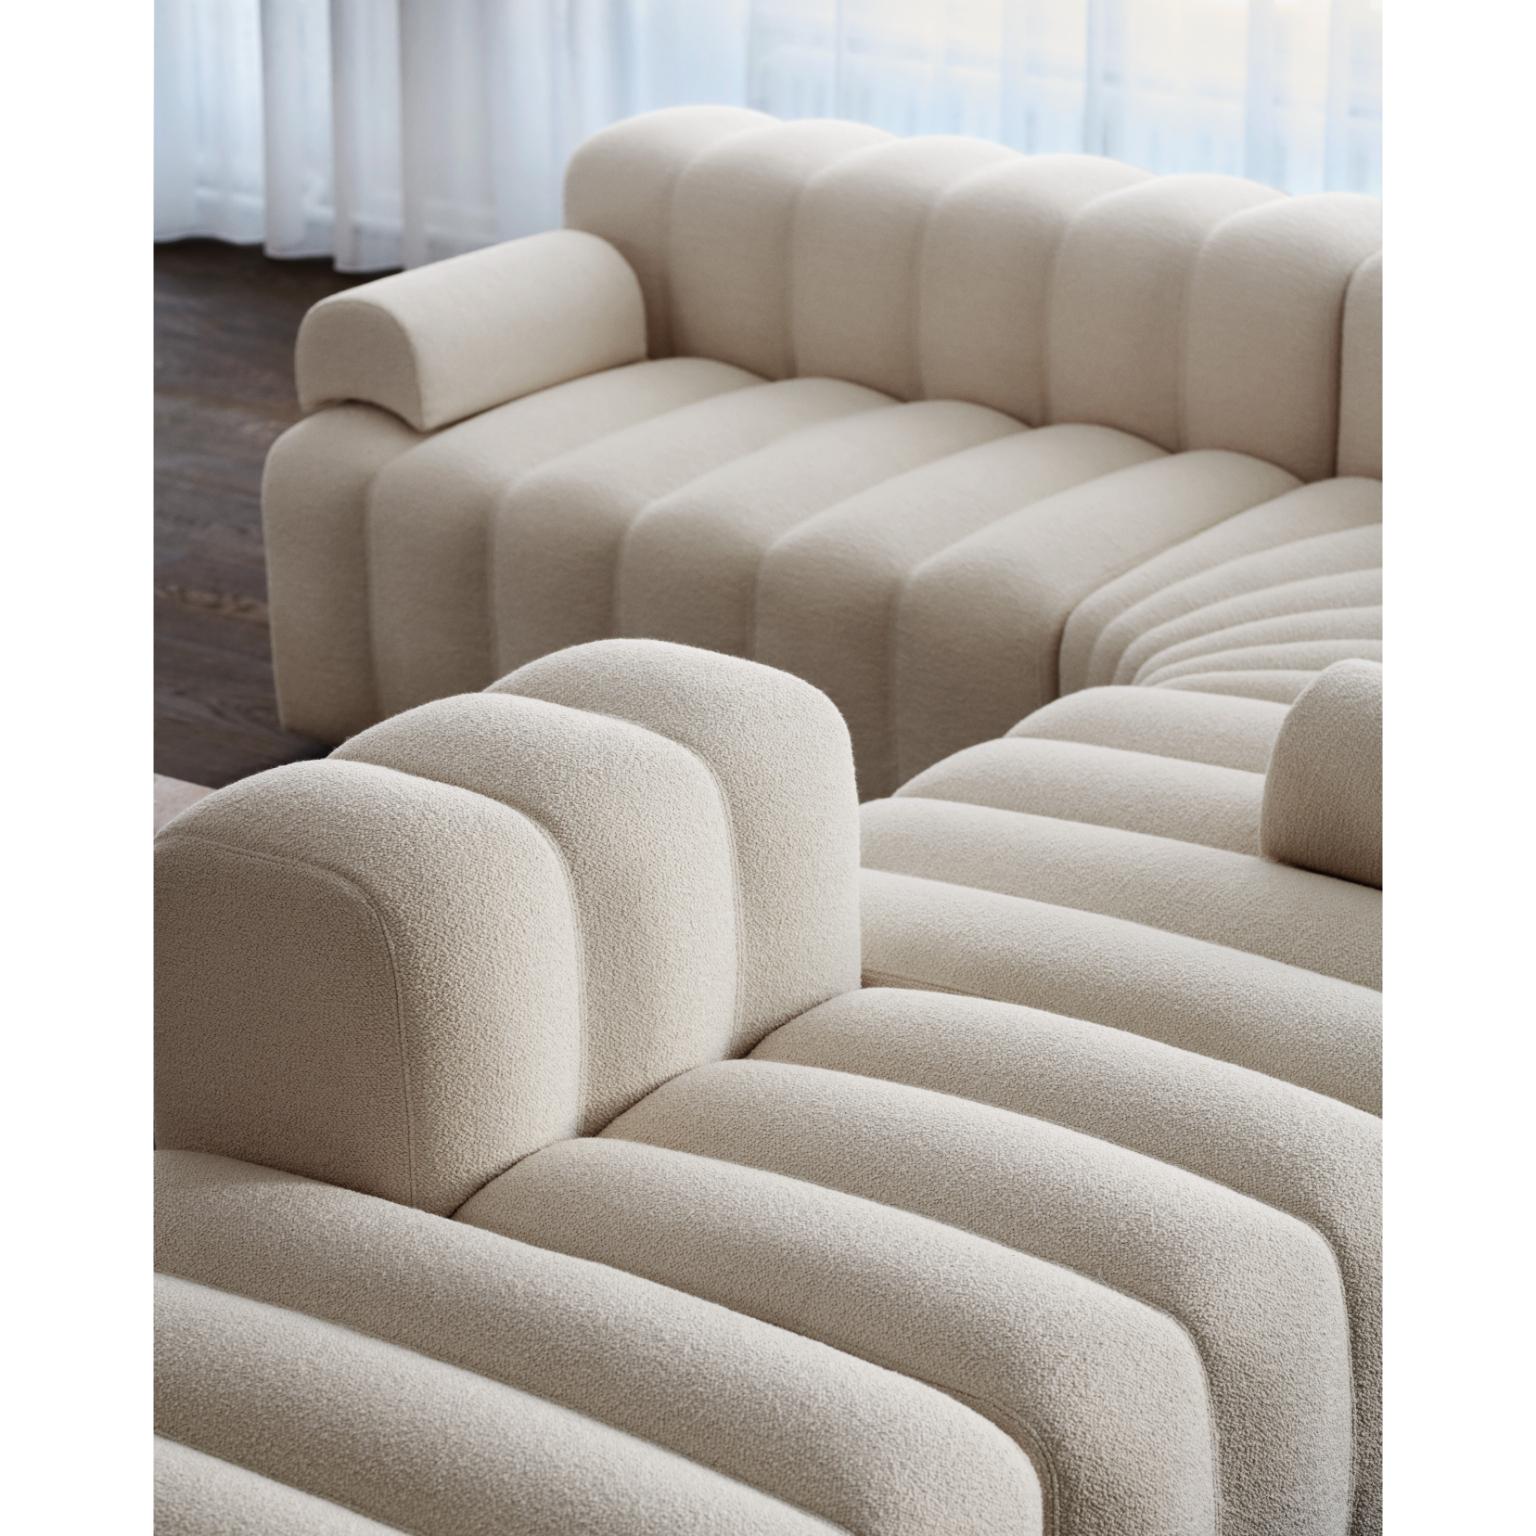 Studio Lounge Medium Right Modular Sofa With Armrest by NORR11
Dimensions: D 130 x W 113 x H 70 cm. SH 47 cm. 
Materials: Foam, wood and upholstery.
Upholstery: Barnum Boucle Color 3.

Available in different upholstery options. A plywood structure